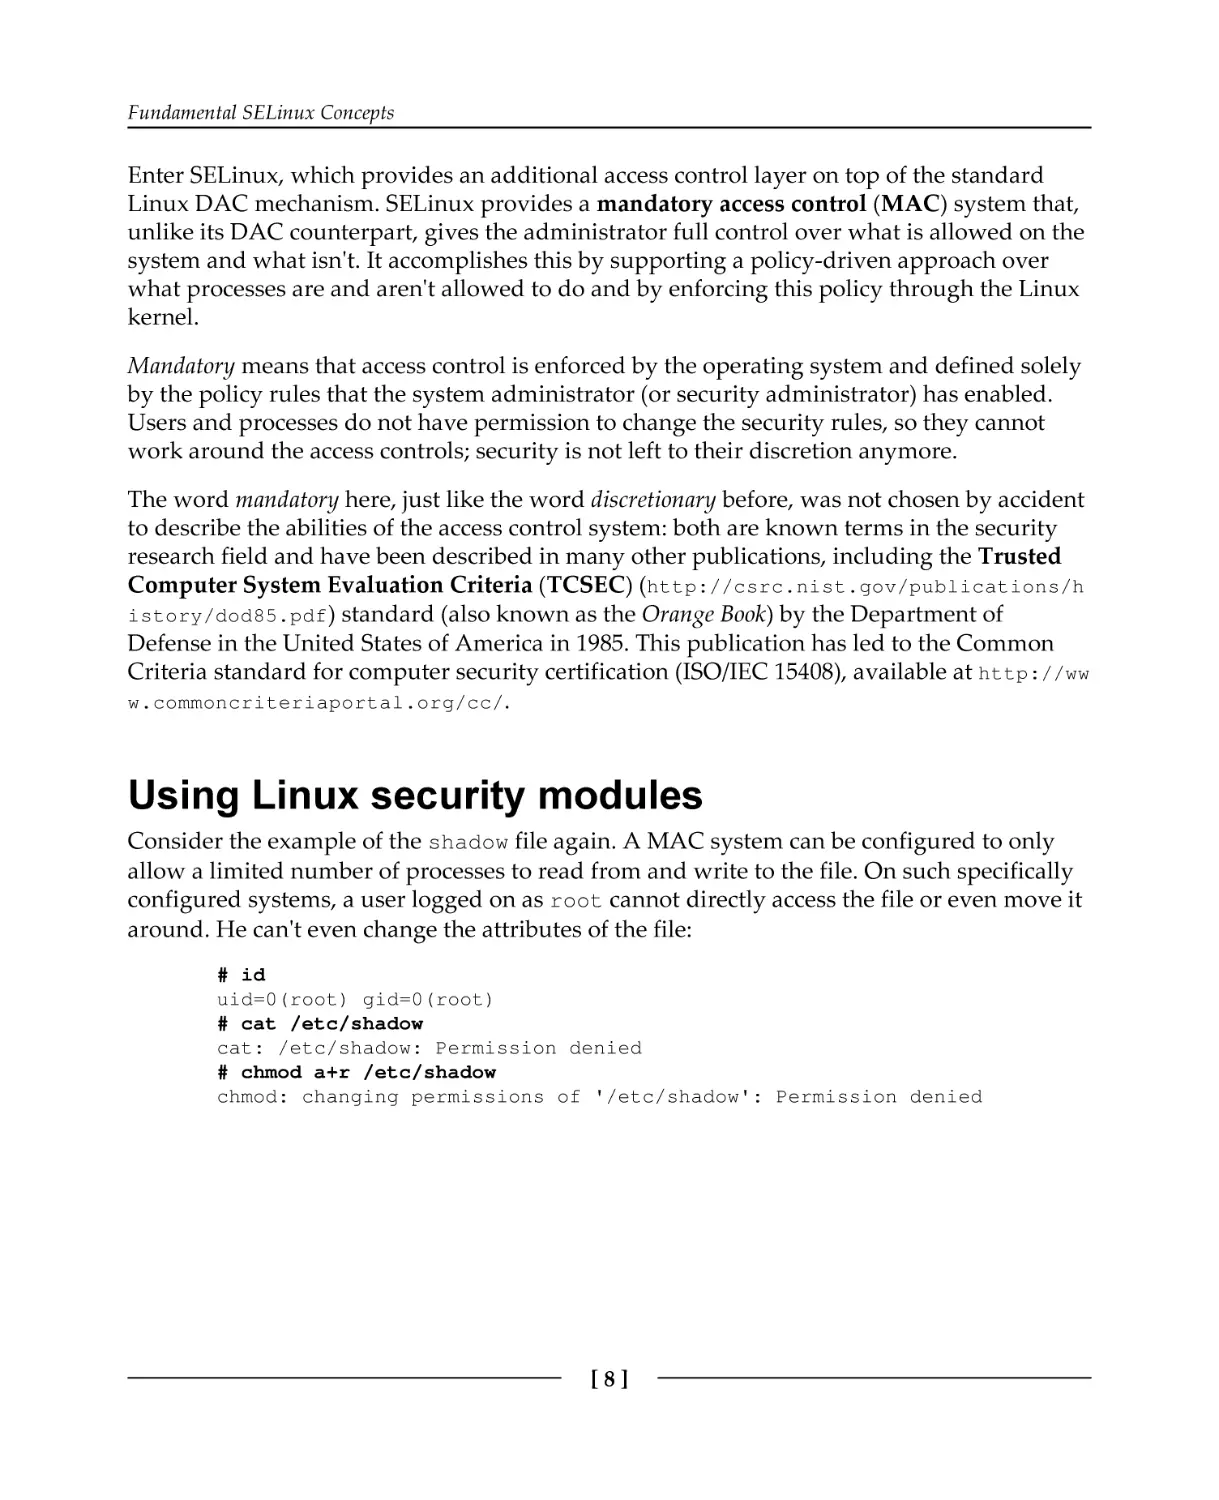 Using Linux security modules